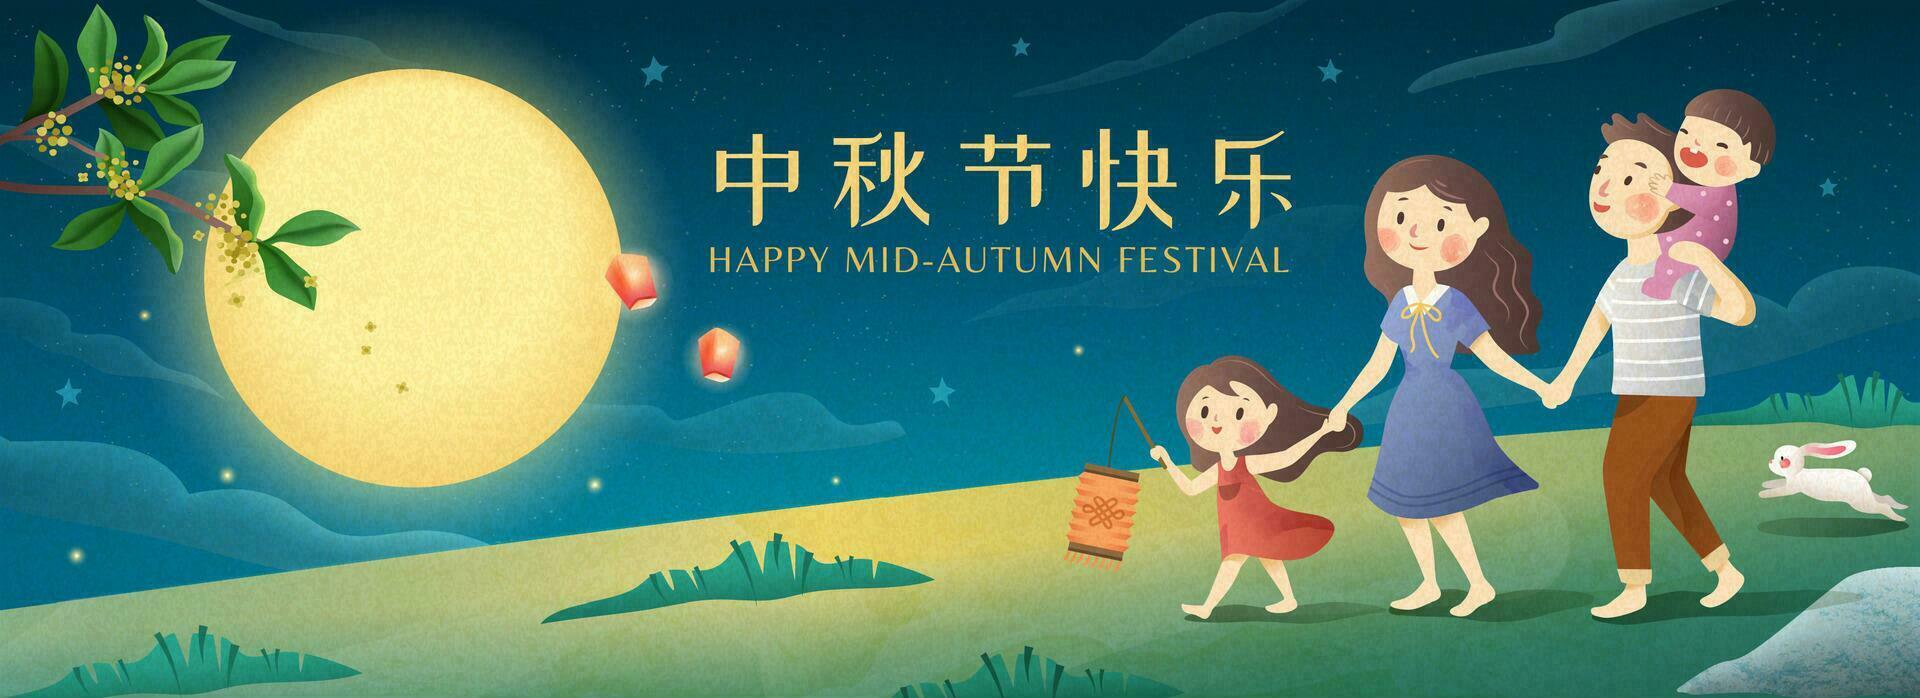 Cute Mid autumn festival banner with family admiring the full moon together, Happy holiday written in Chinese words vector